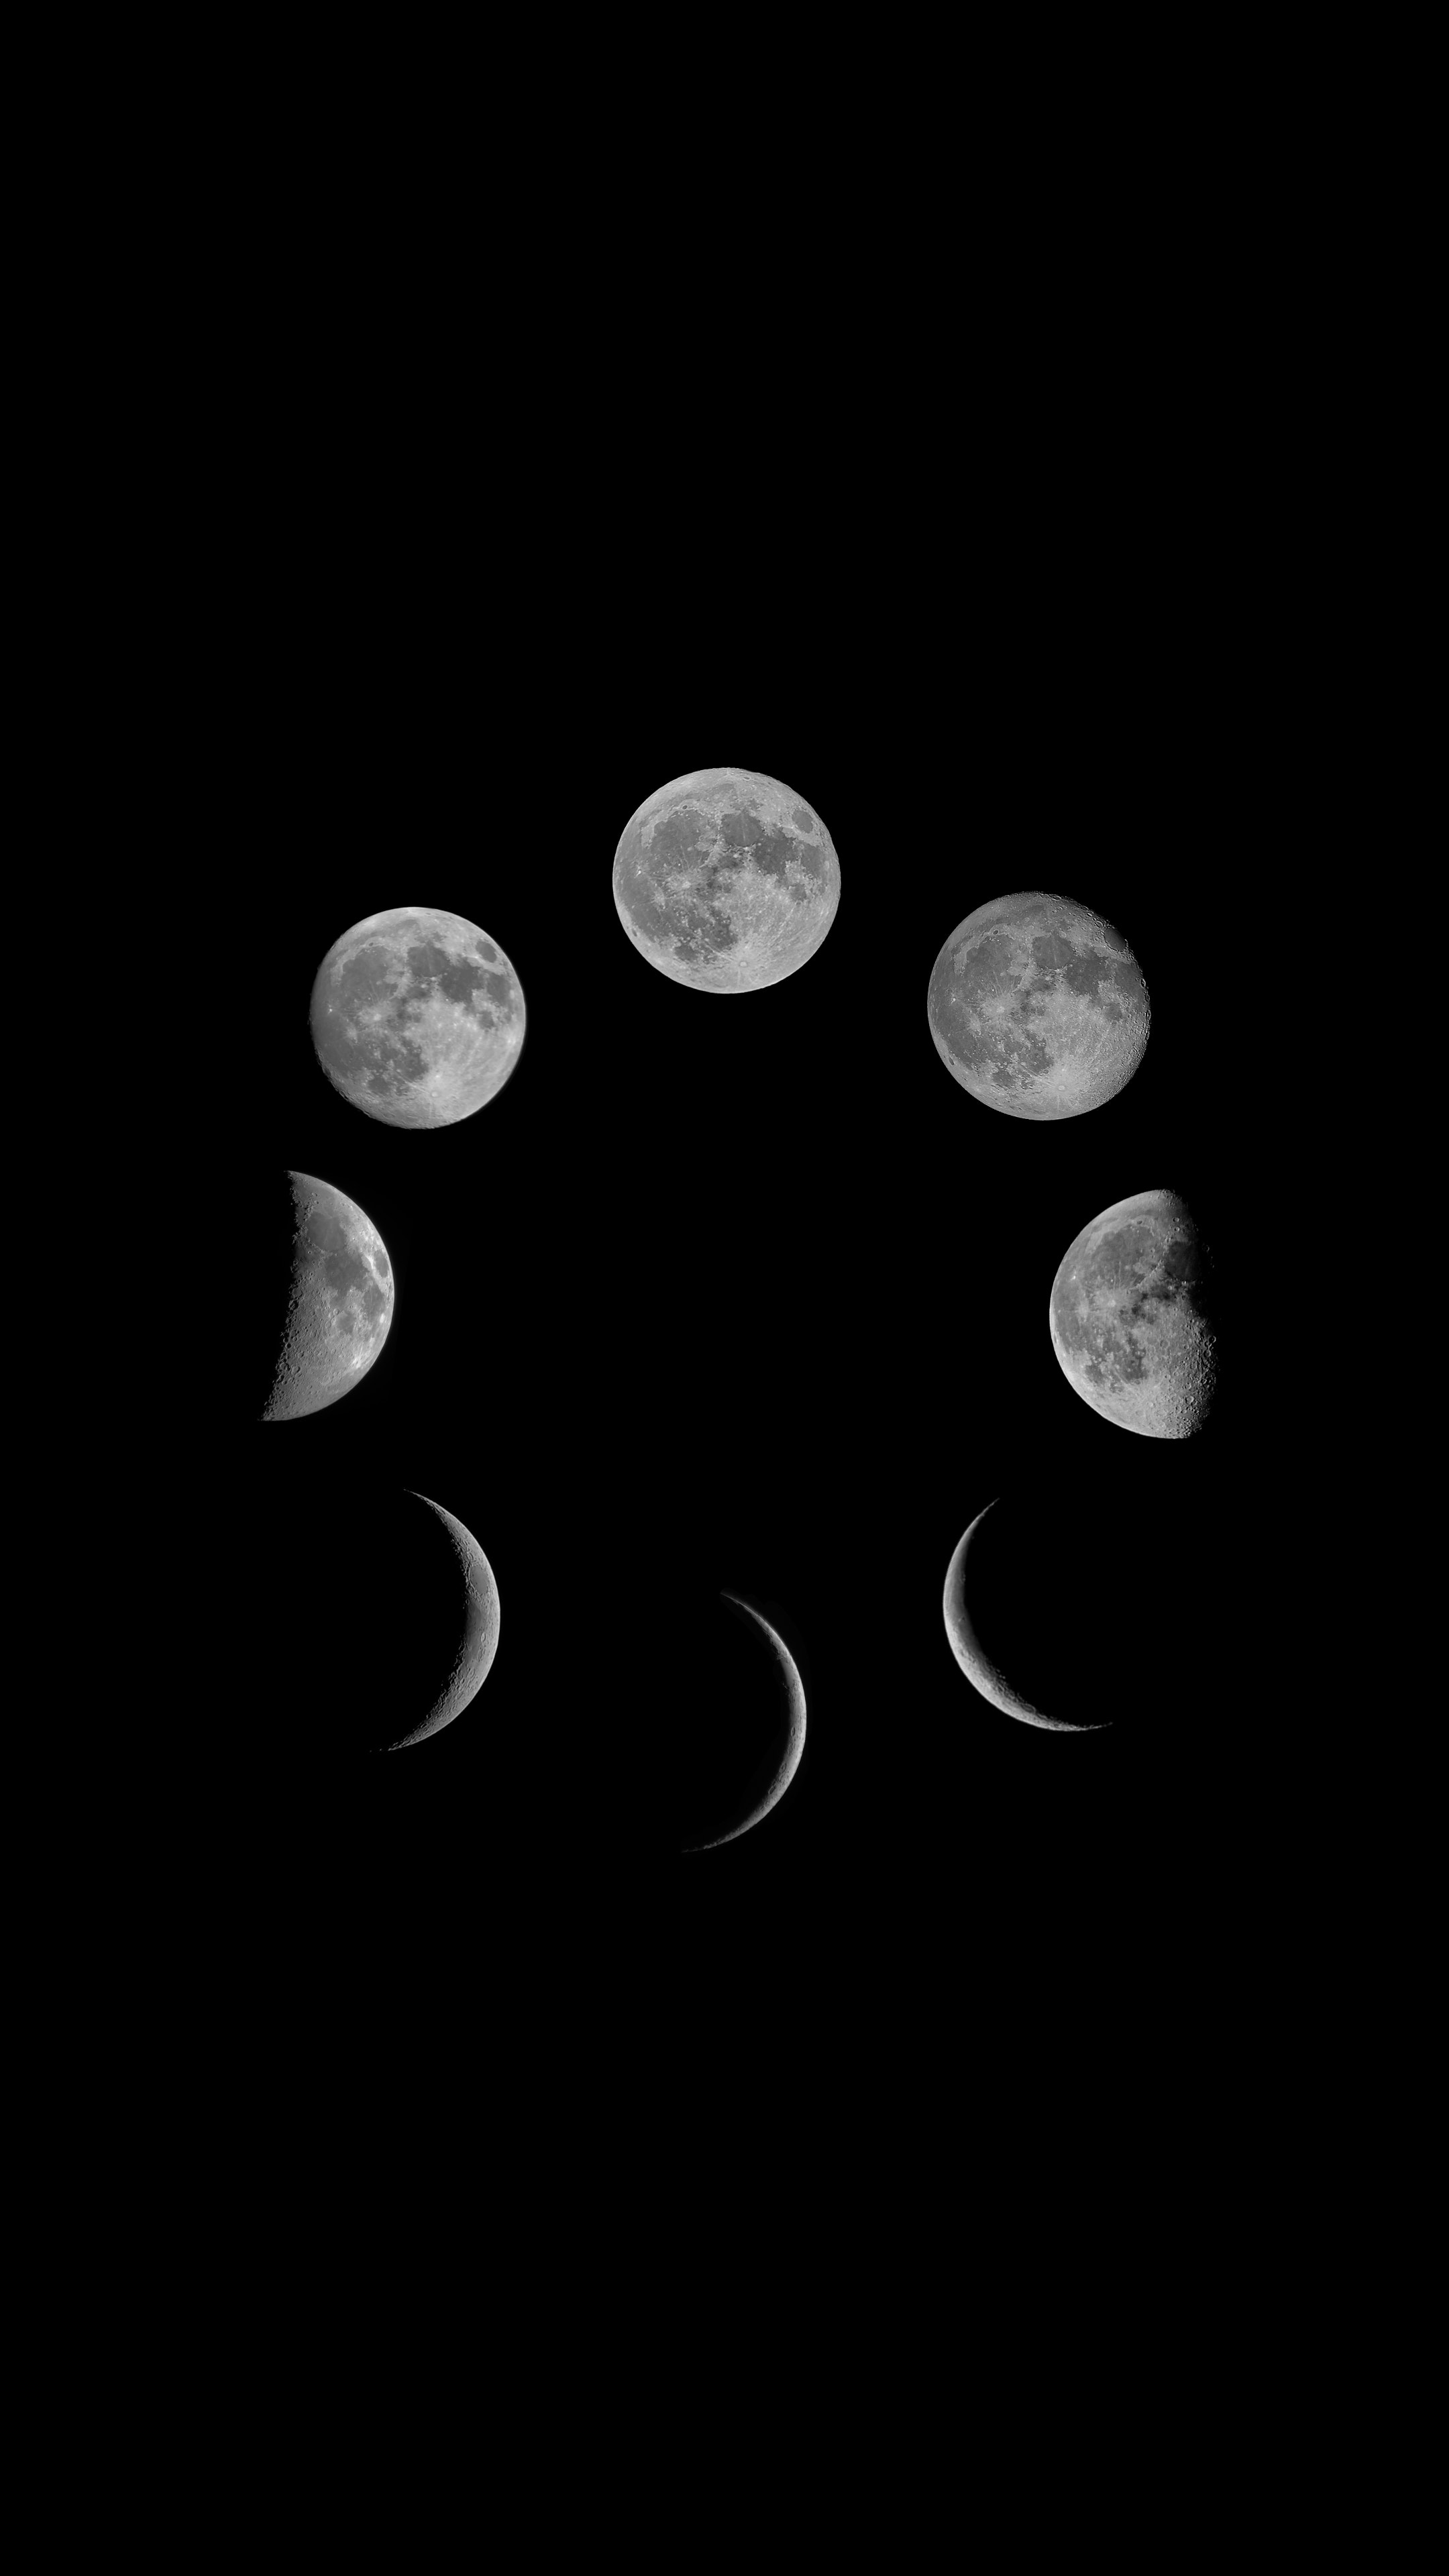 The moon in different phases on a black background - Moon phases